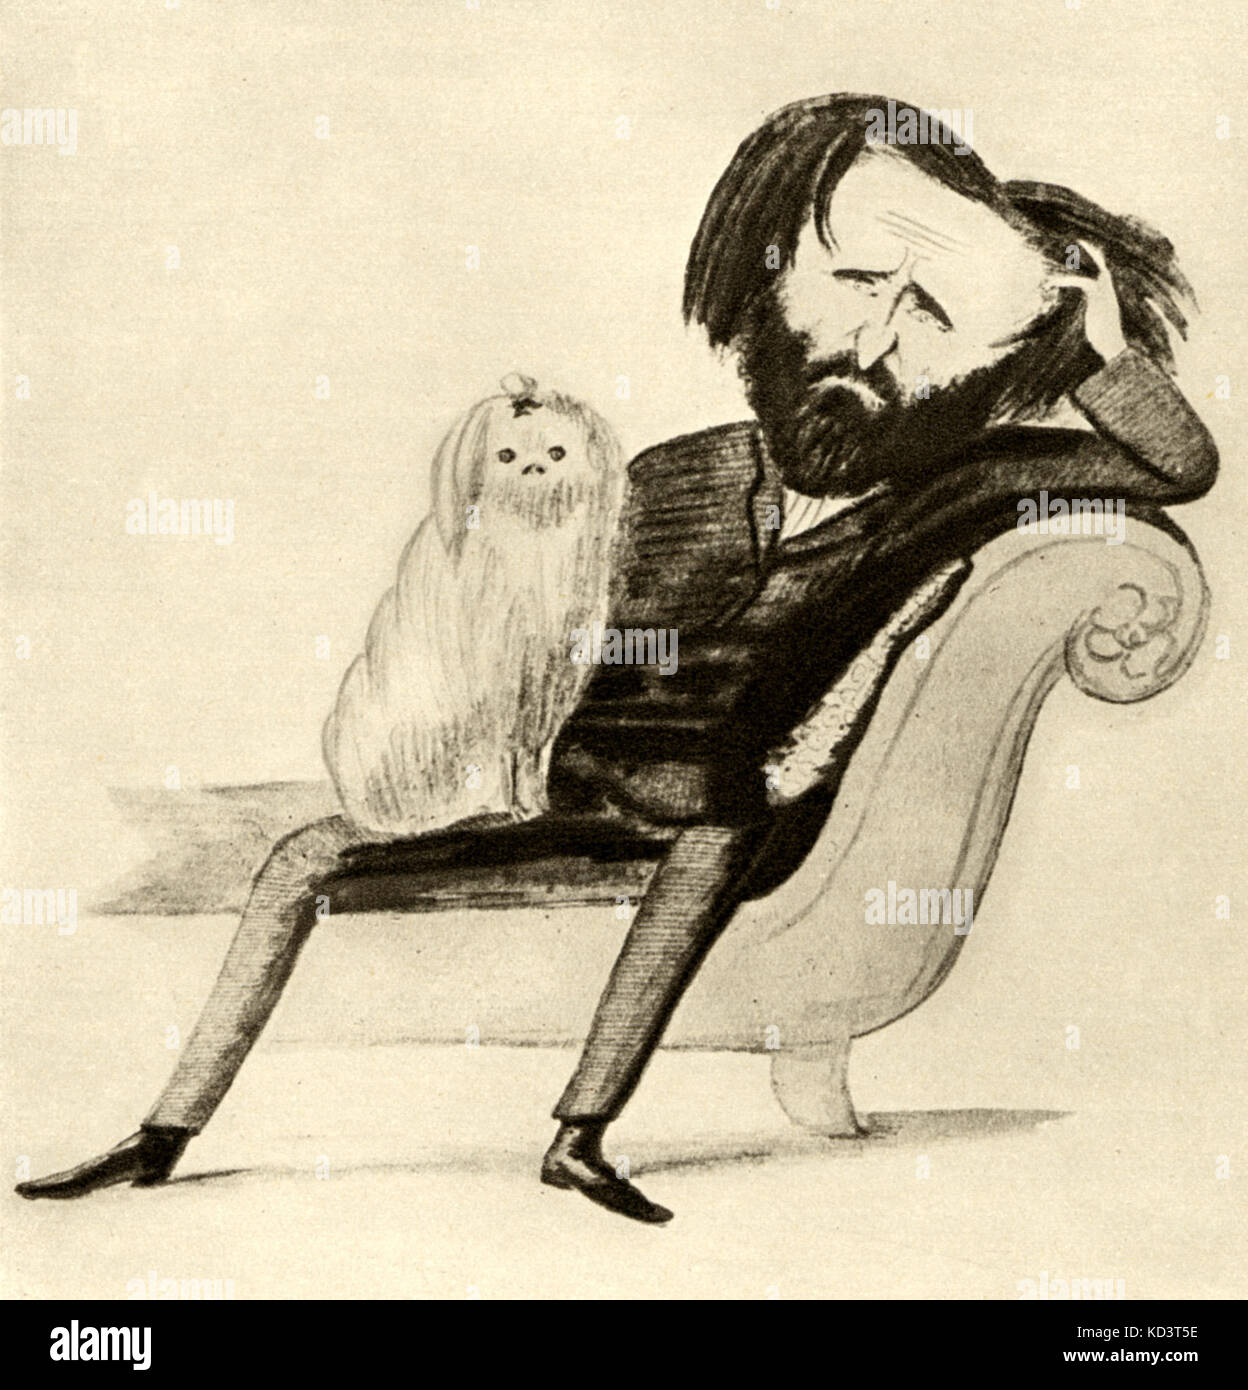 Verdi,  seated on a chaise-longue with his pet dog Lulu by  Delfico  Italian composer (1813-1901). Stock Photo